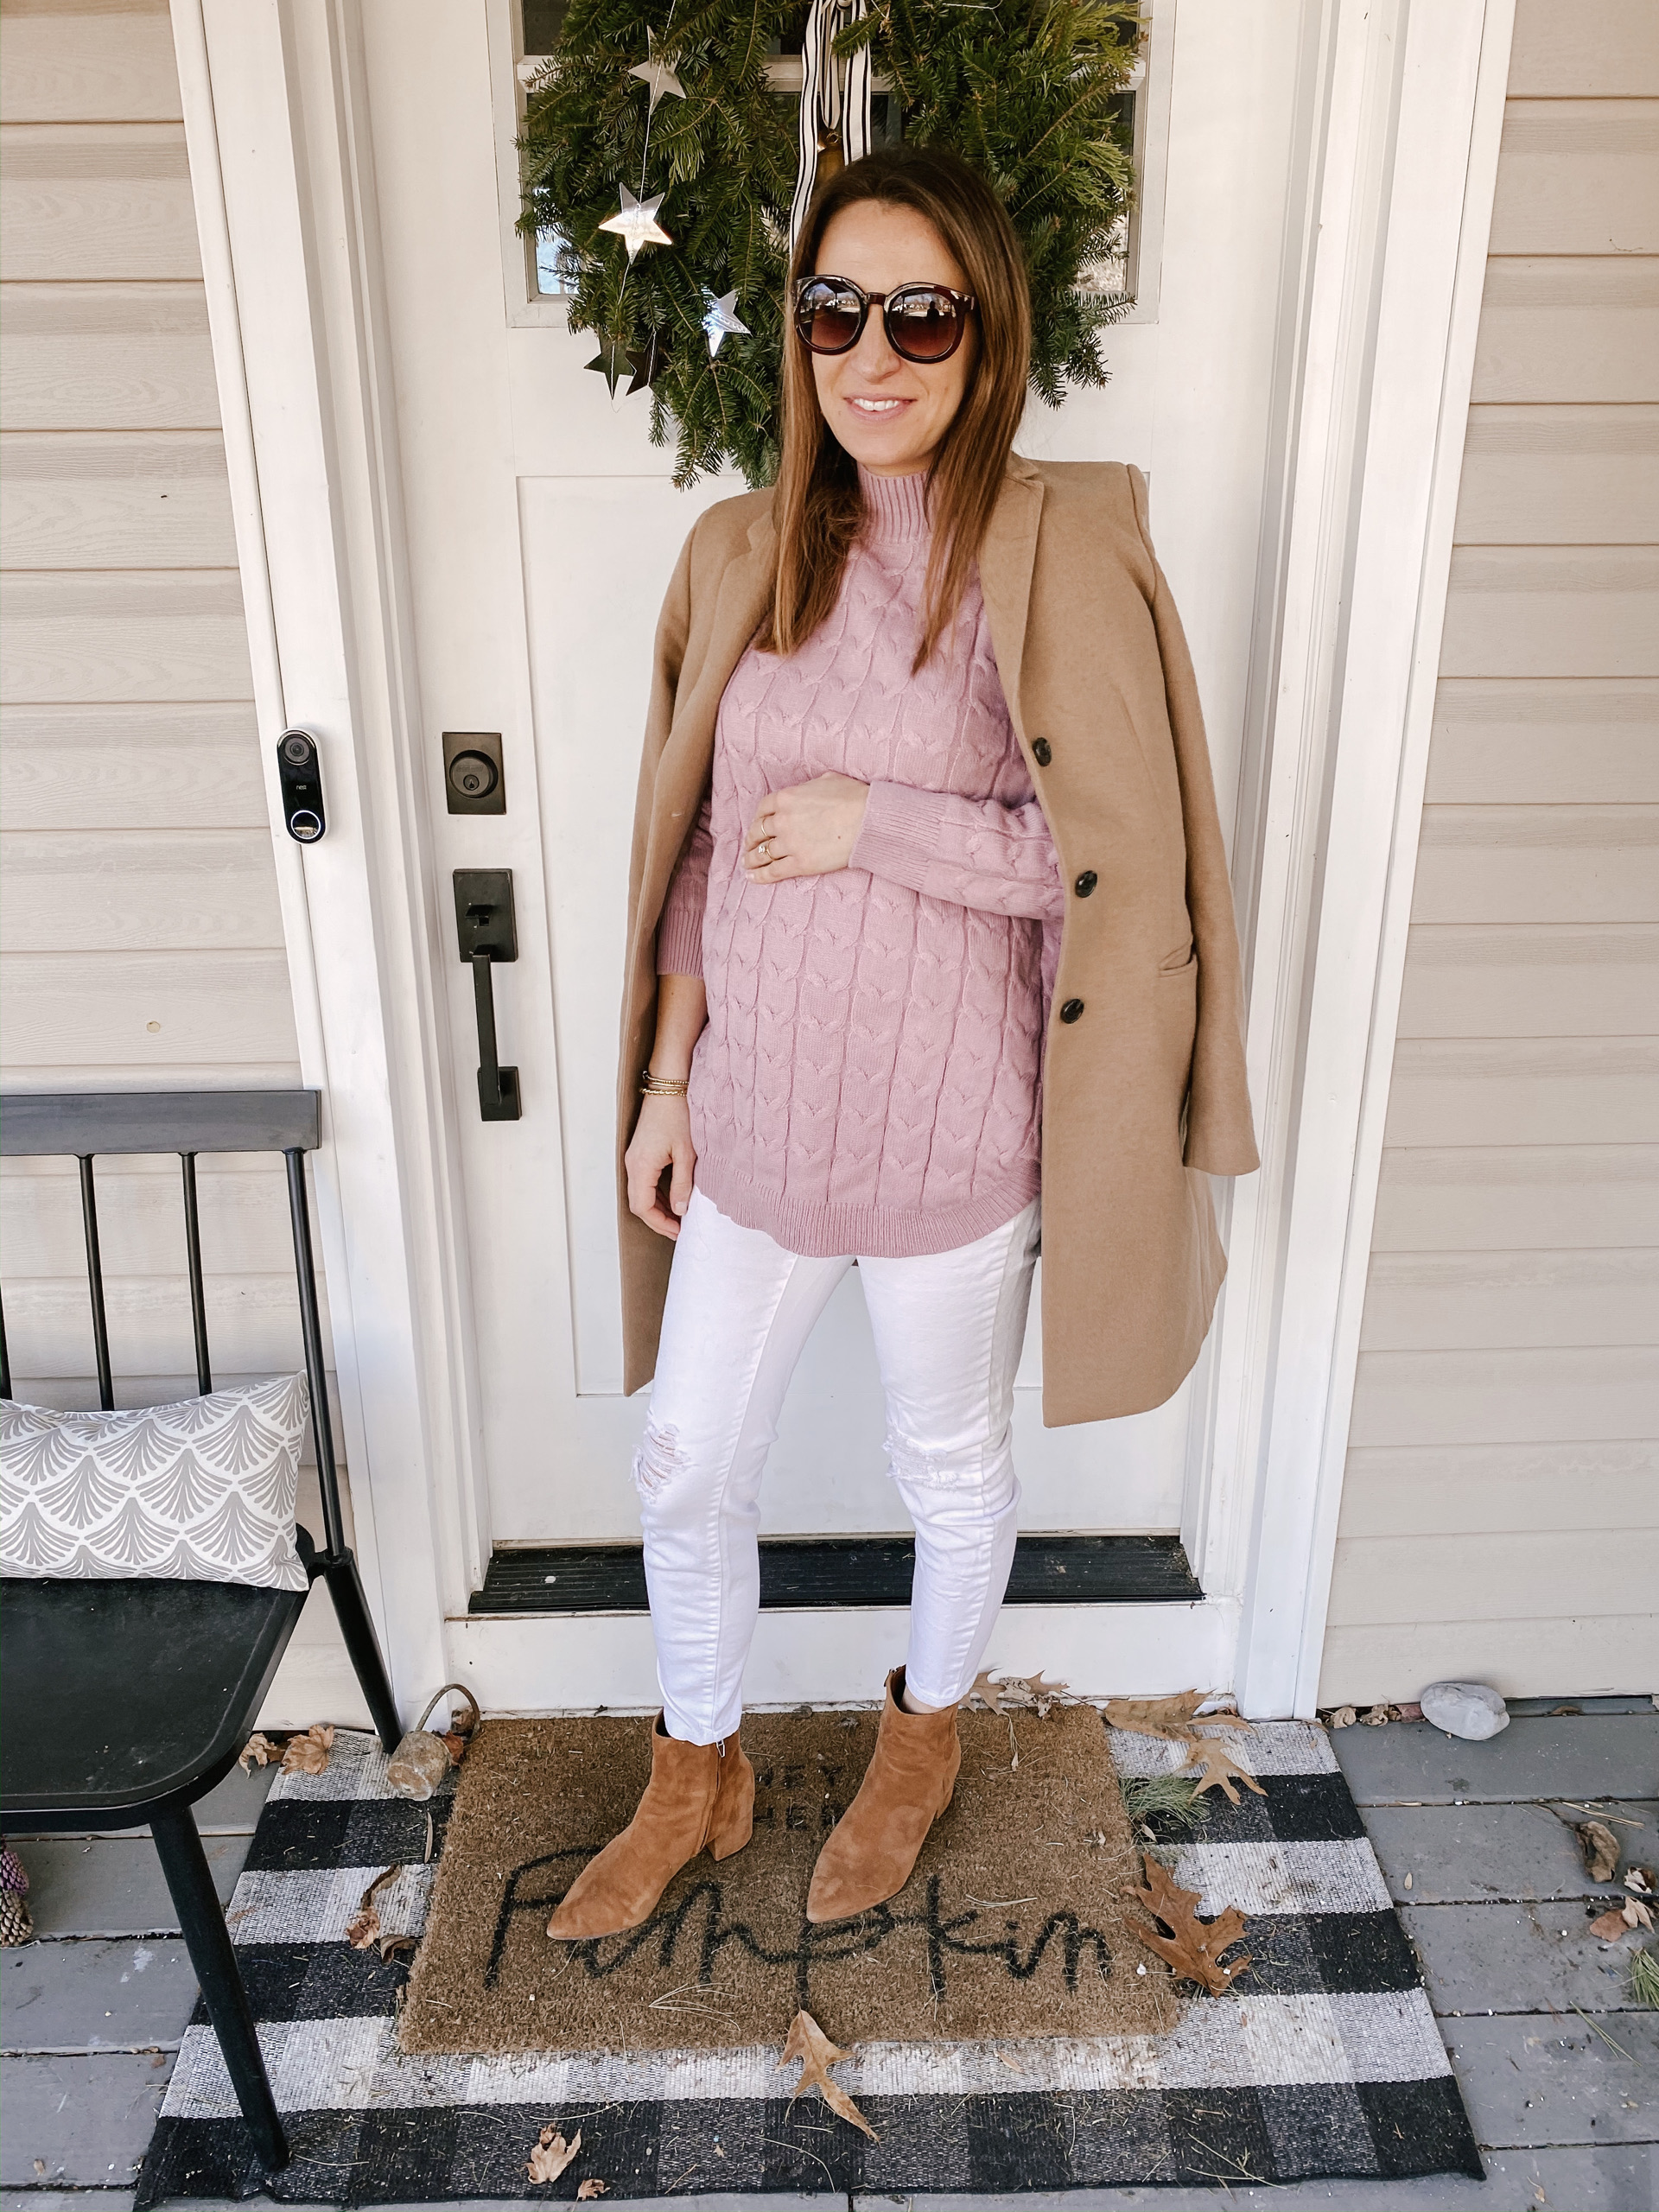 Warm Weather Maternity Clothes: Must Haves